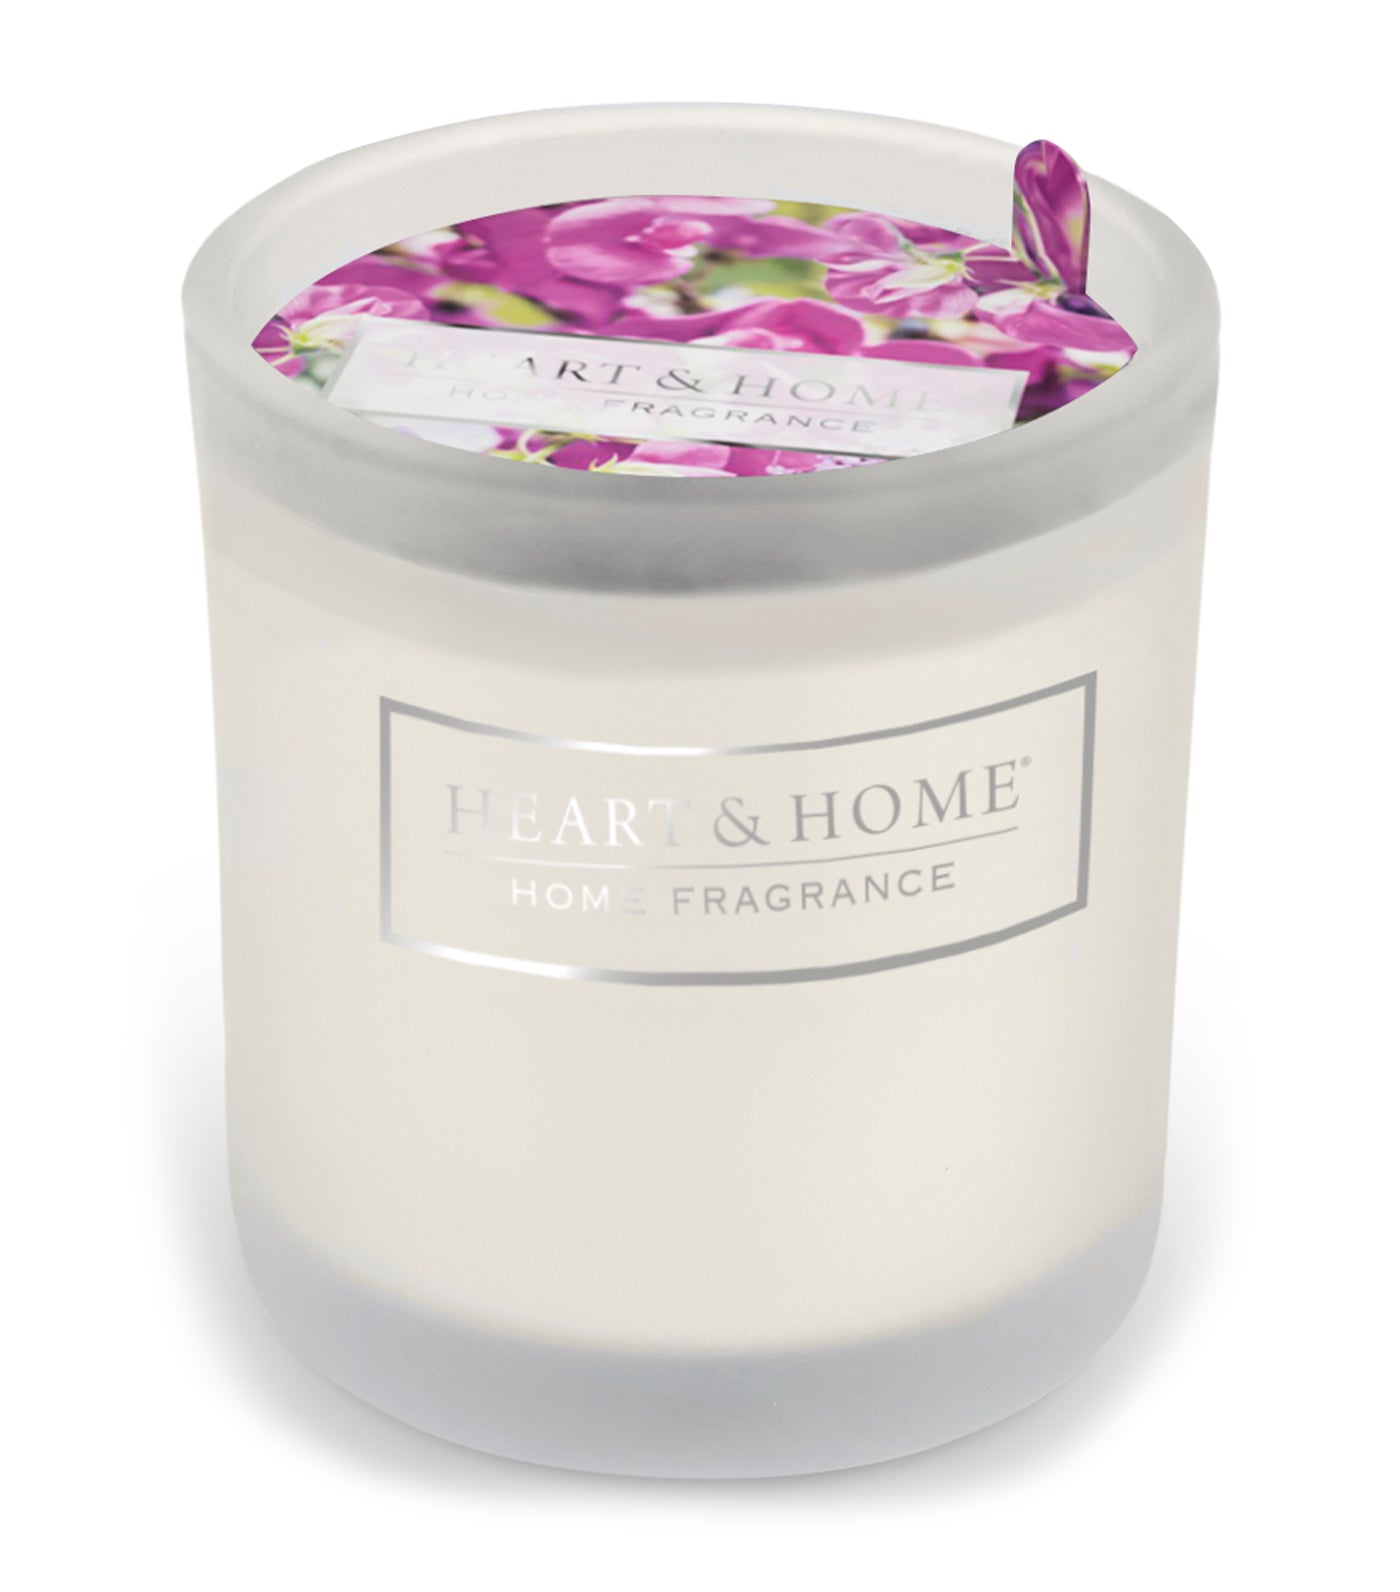 heart & home sweet pea - glass votive soy candle